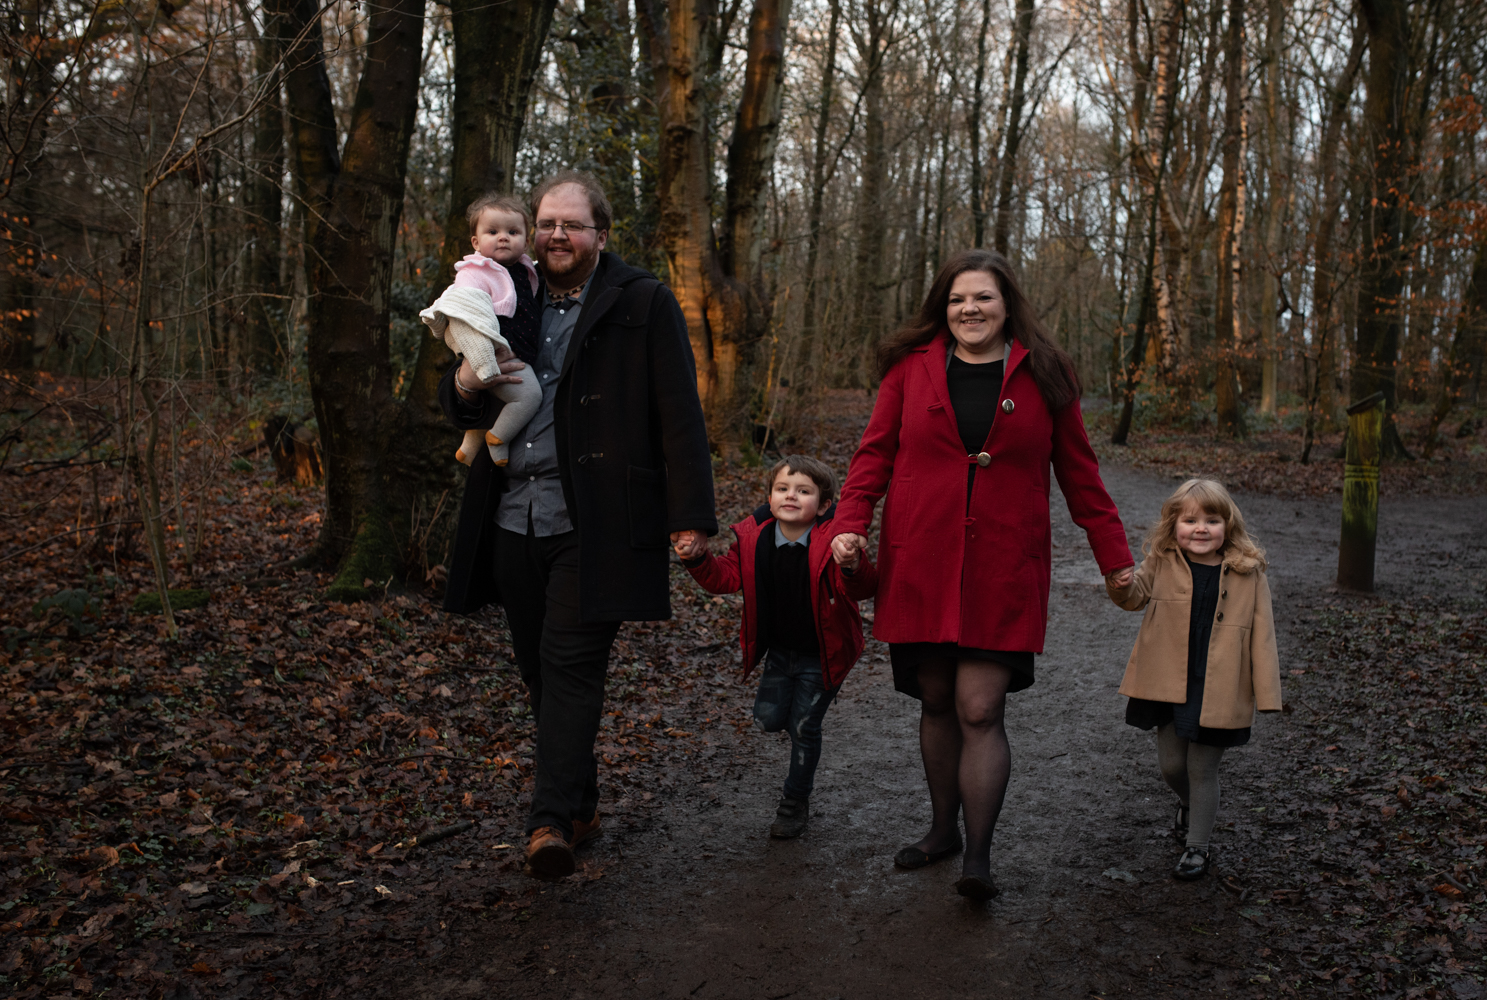 A family group walking in the woods